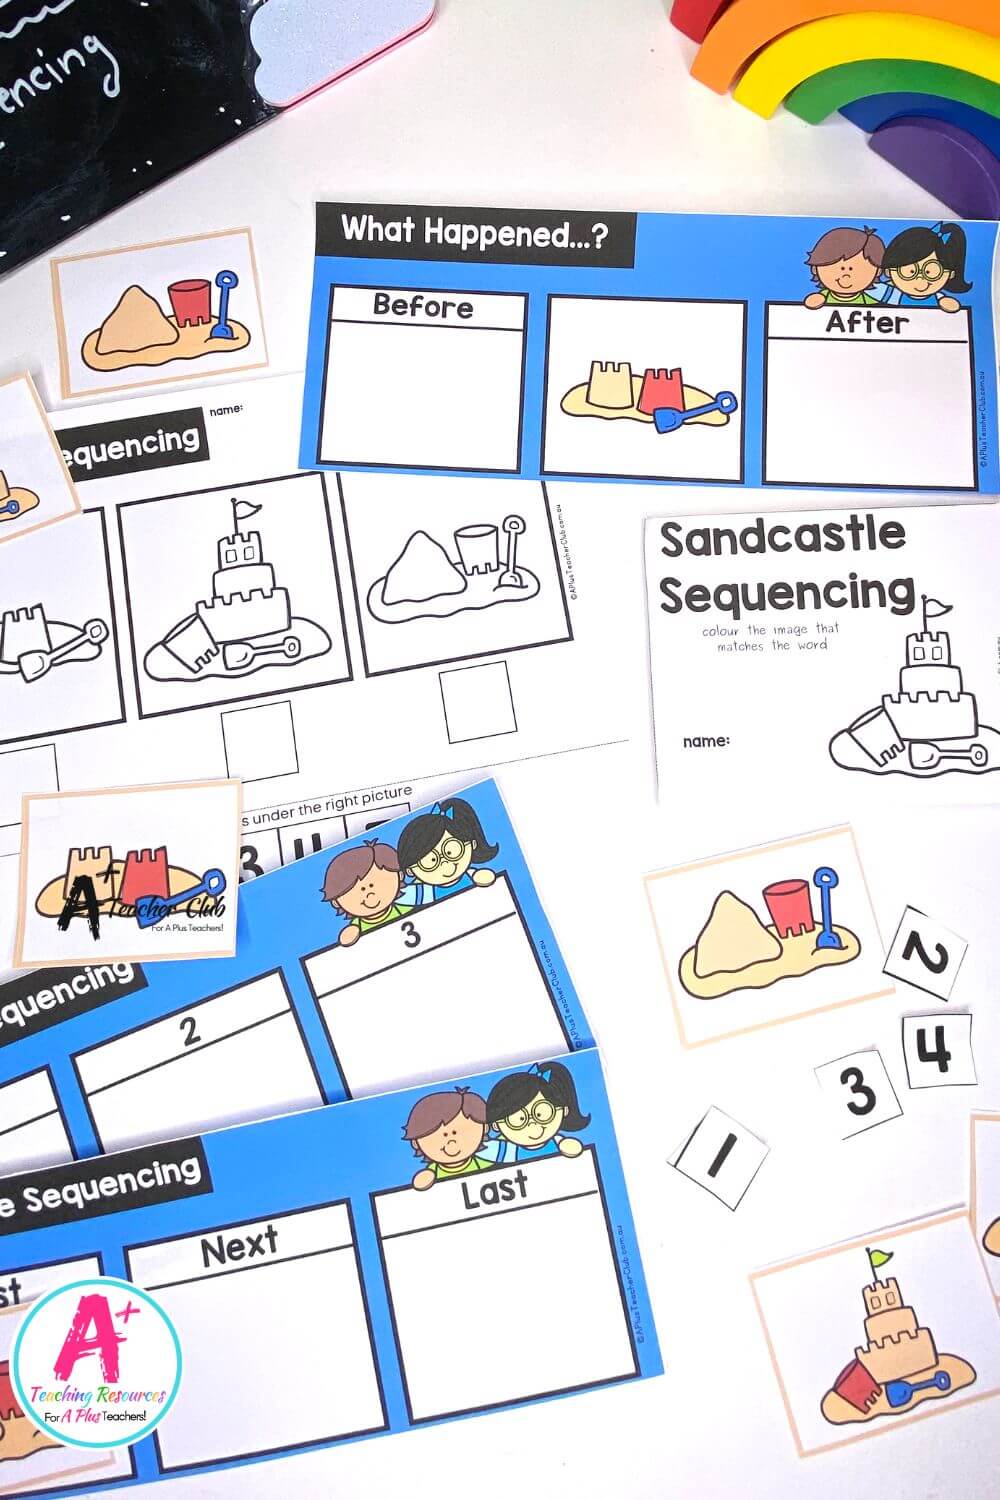 3-Step Sequencing Everyday Events - Build A Sandcastle Activities Pack